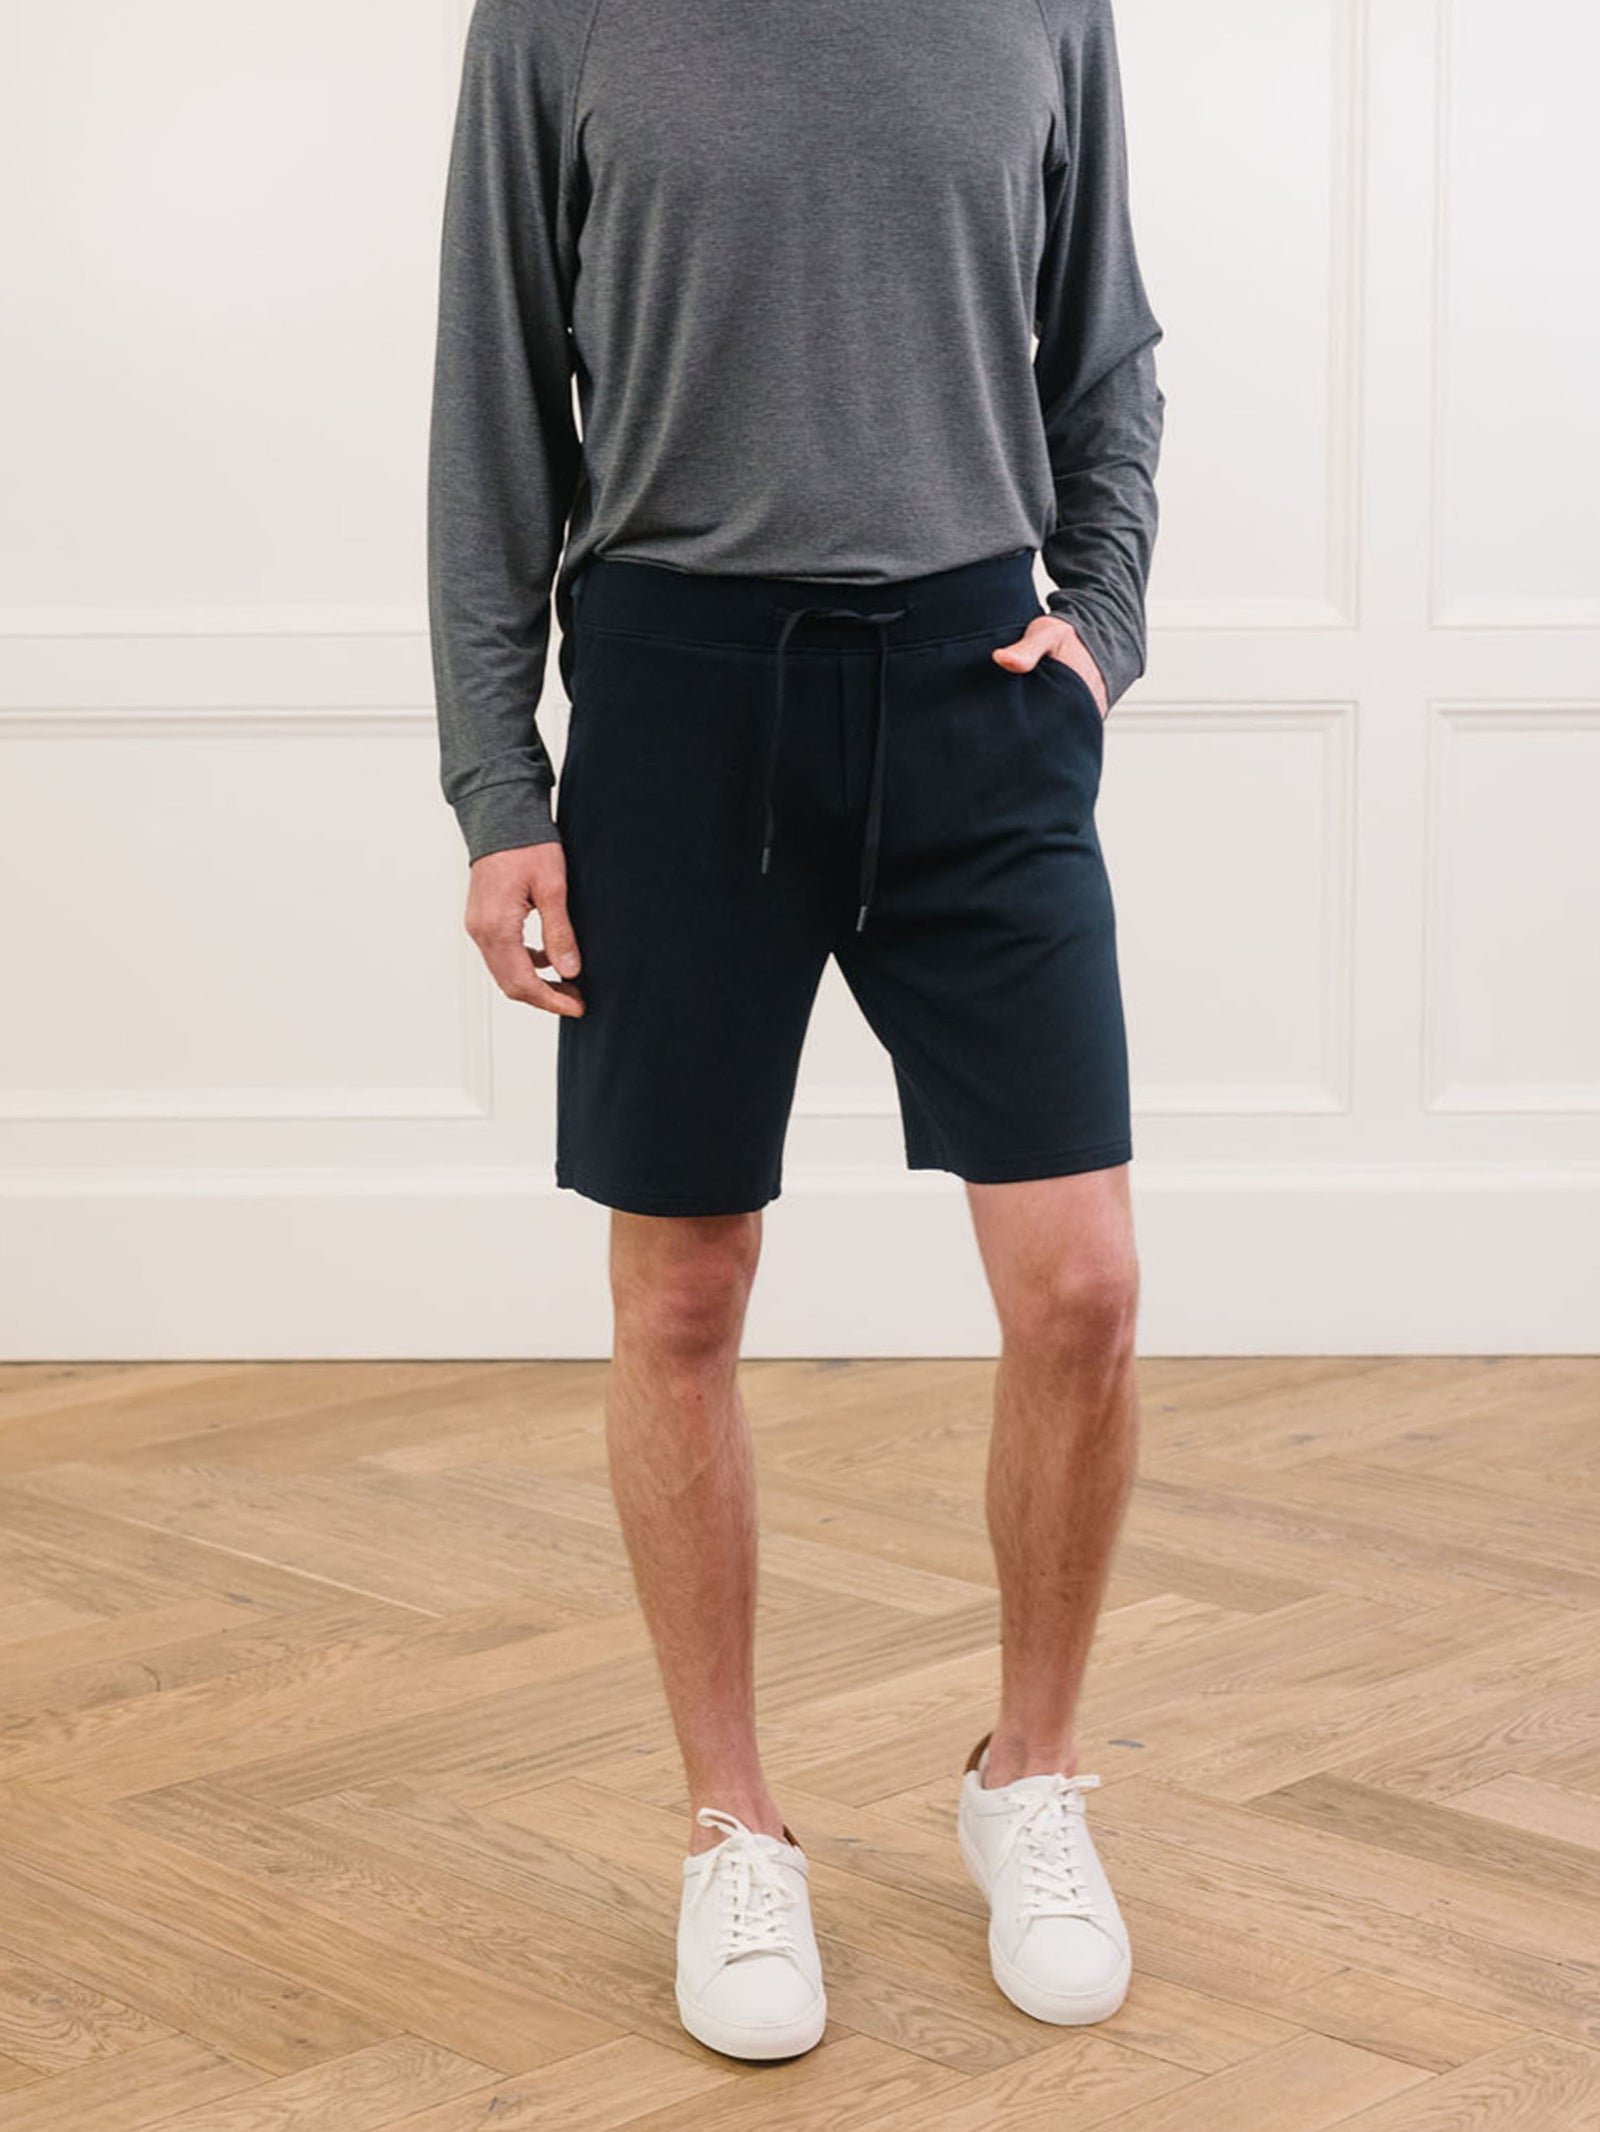 7 Inseam Shorts For Men - Soft Shorts for Men's Comfort – Bamboo Ave.